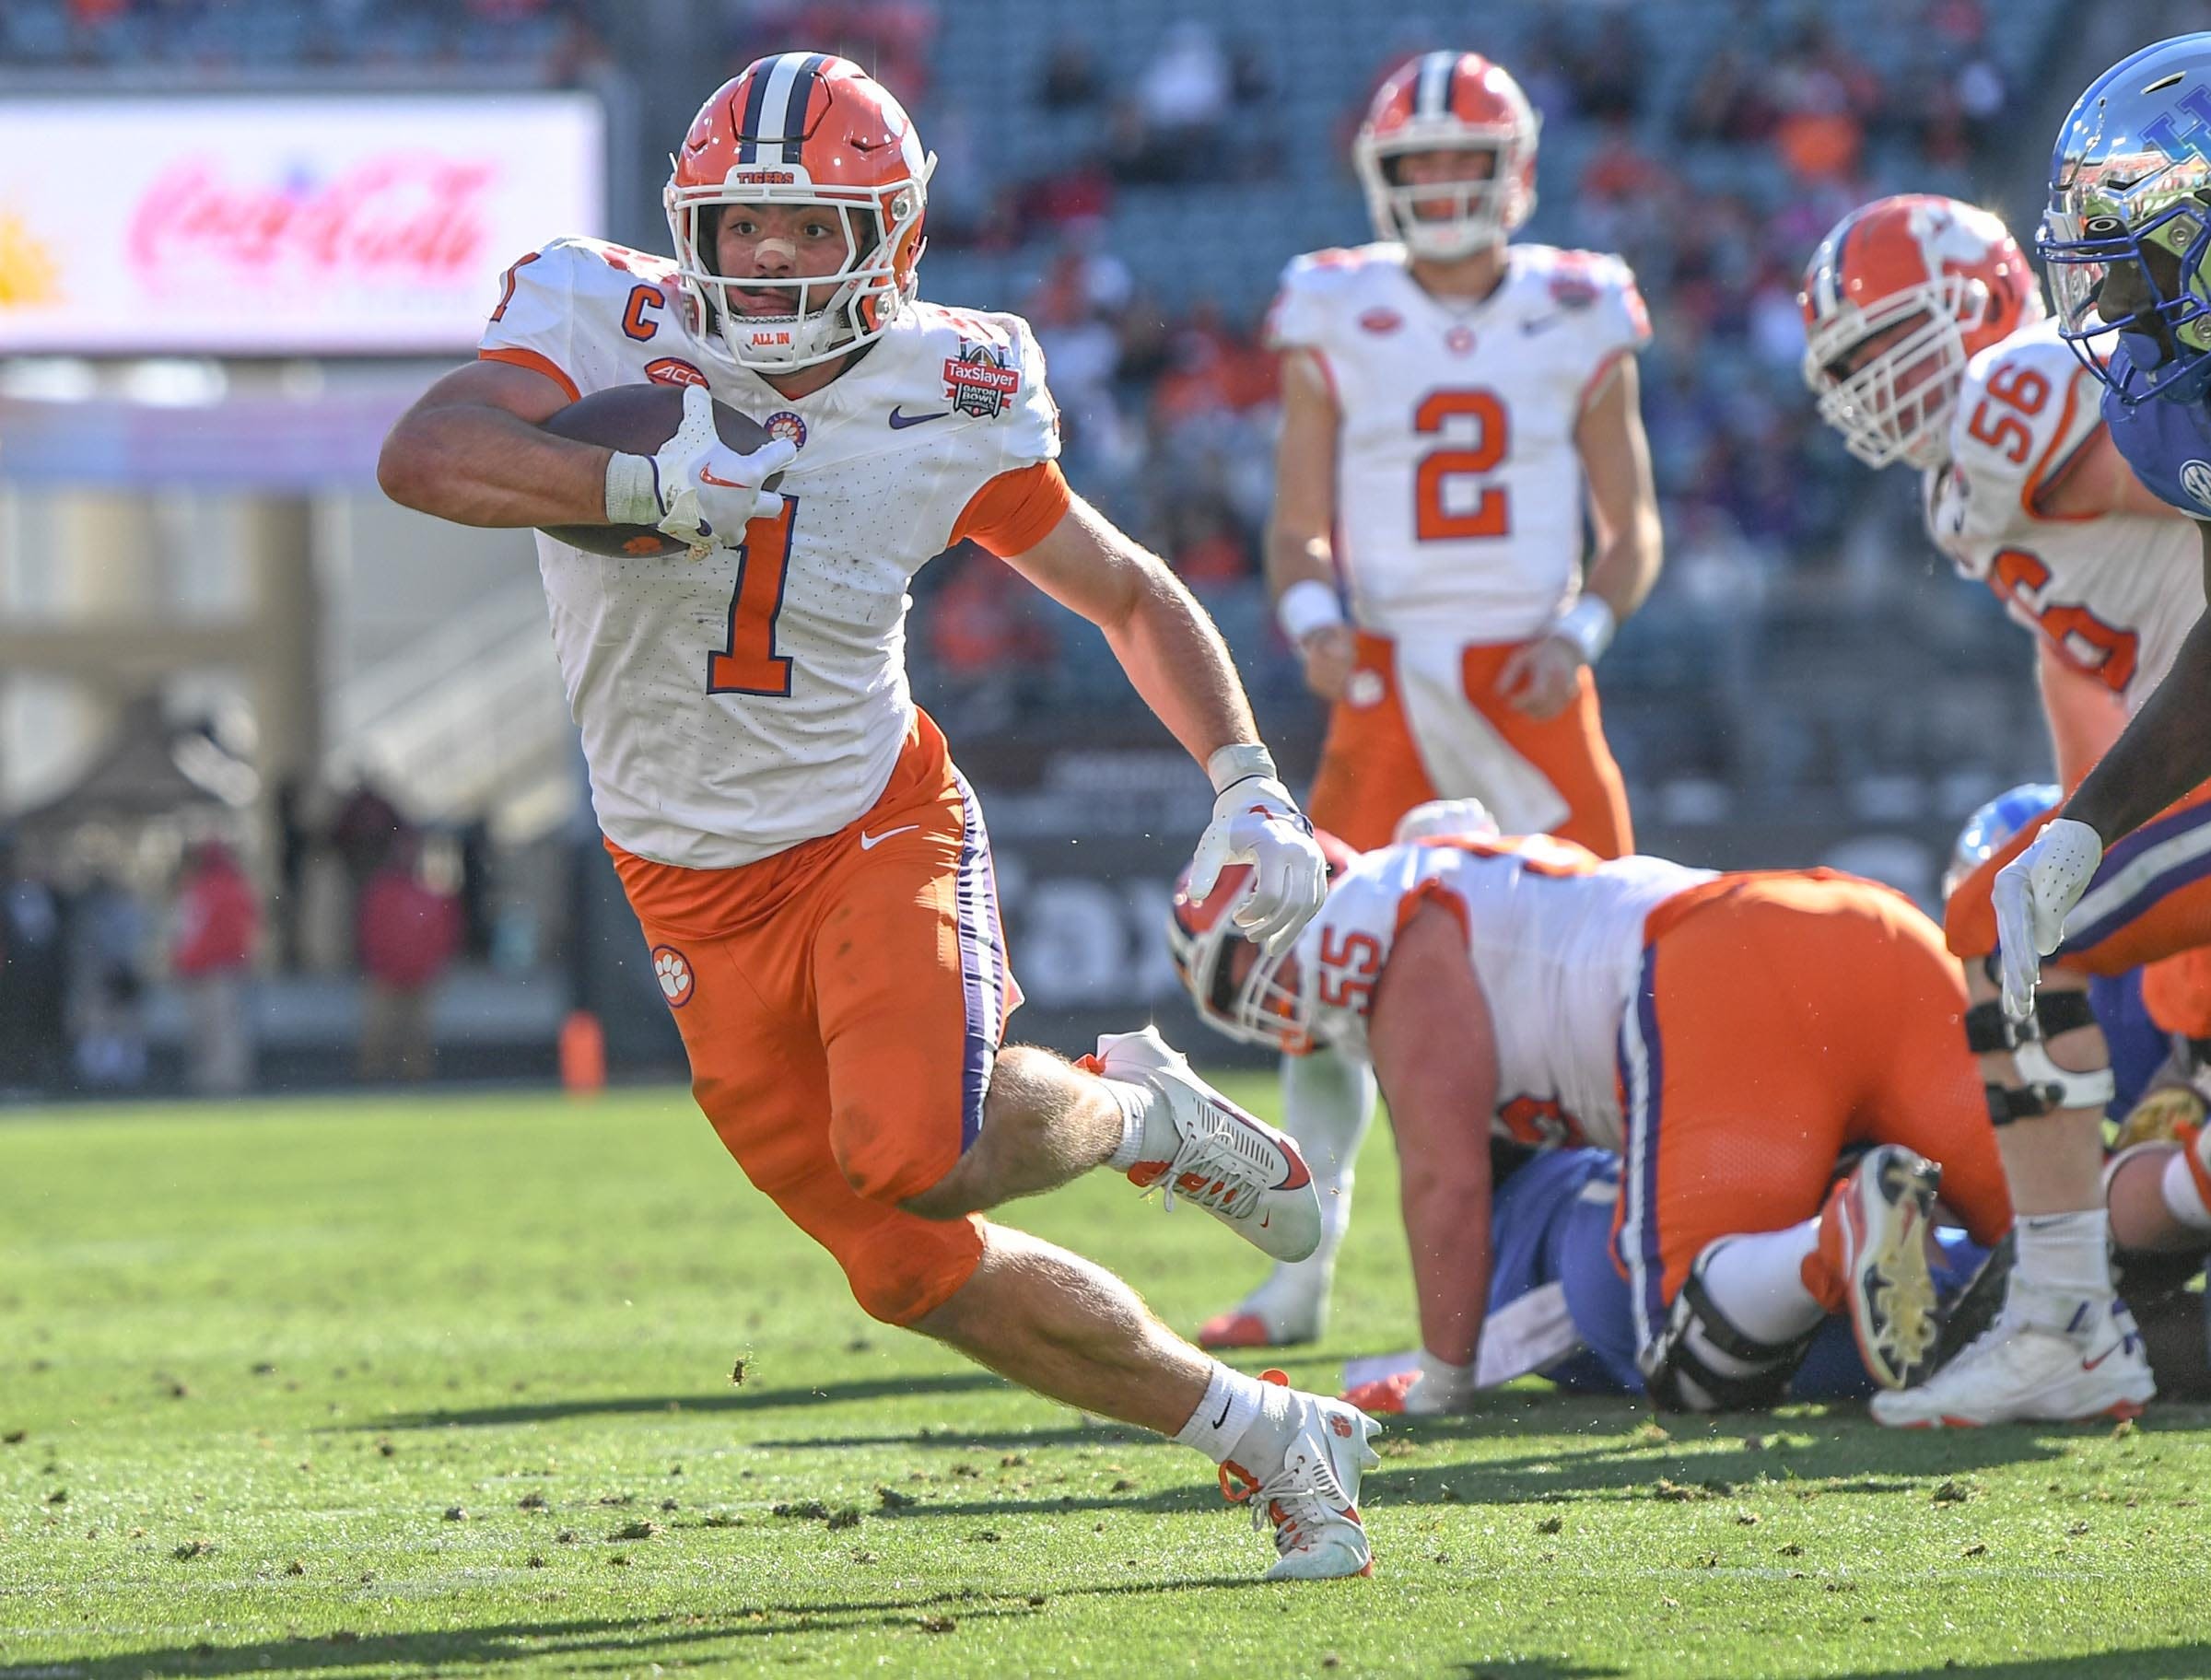 Trade frenzy! Eagles pick Clemson RB Will Shipley, and the message from Saquon Barkley